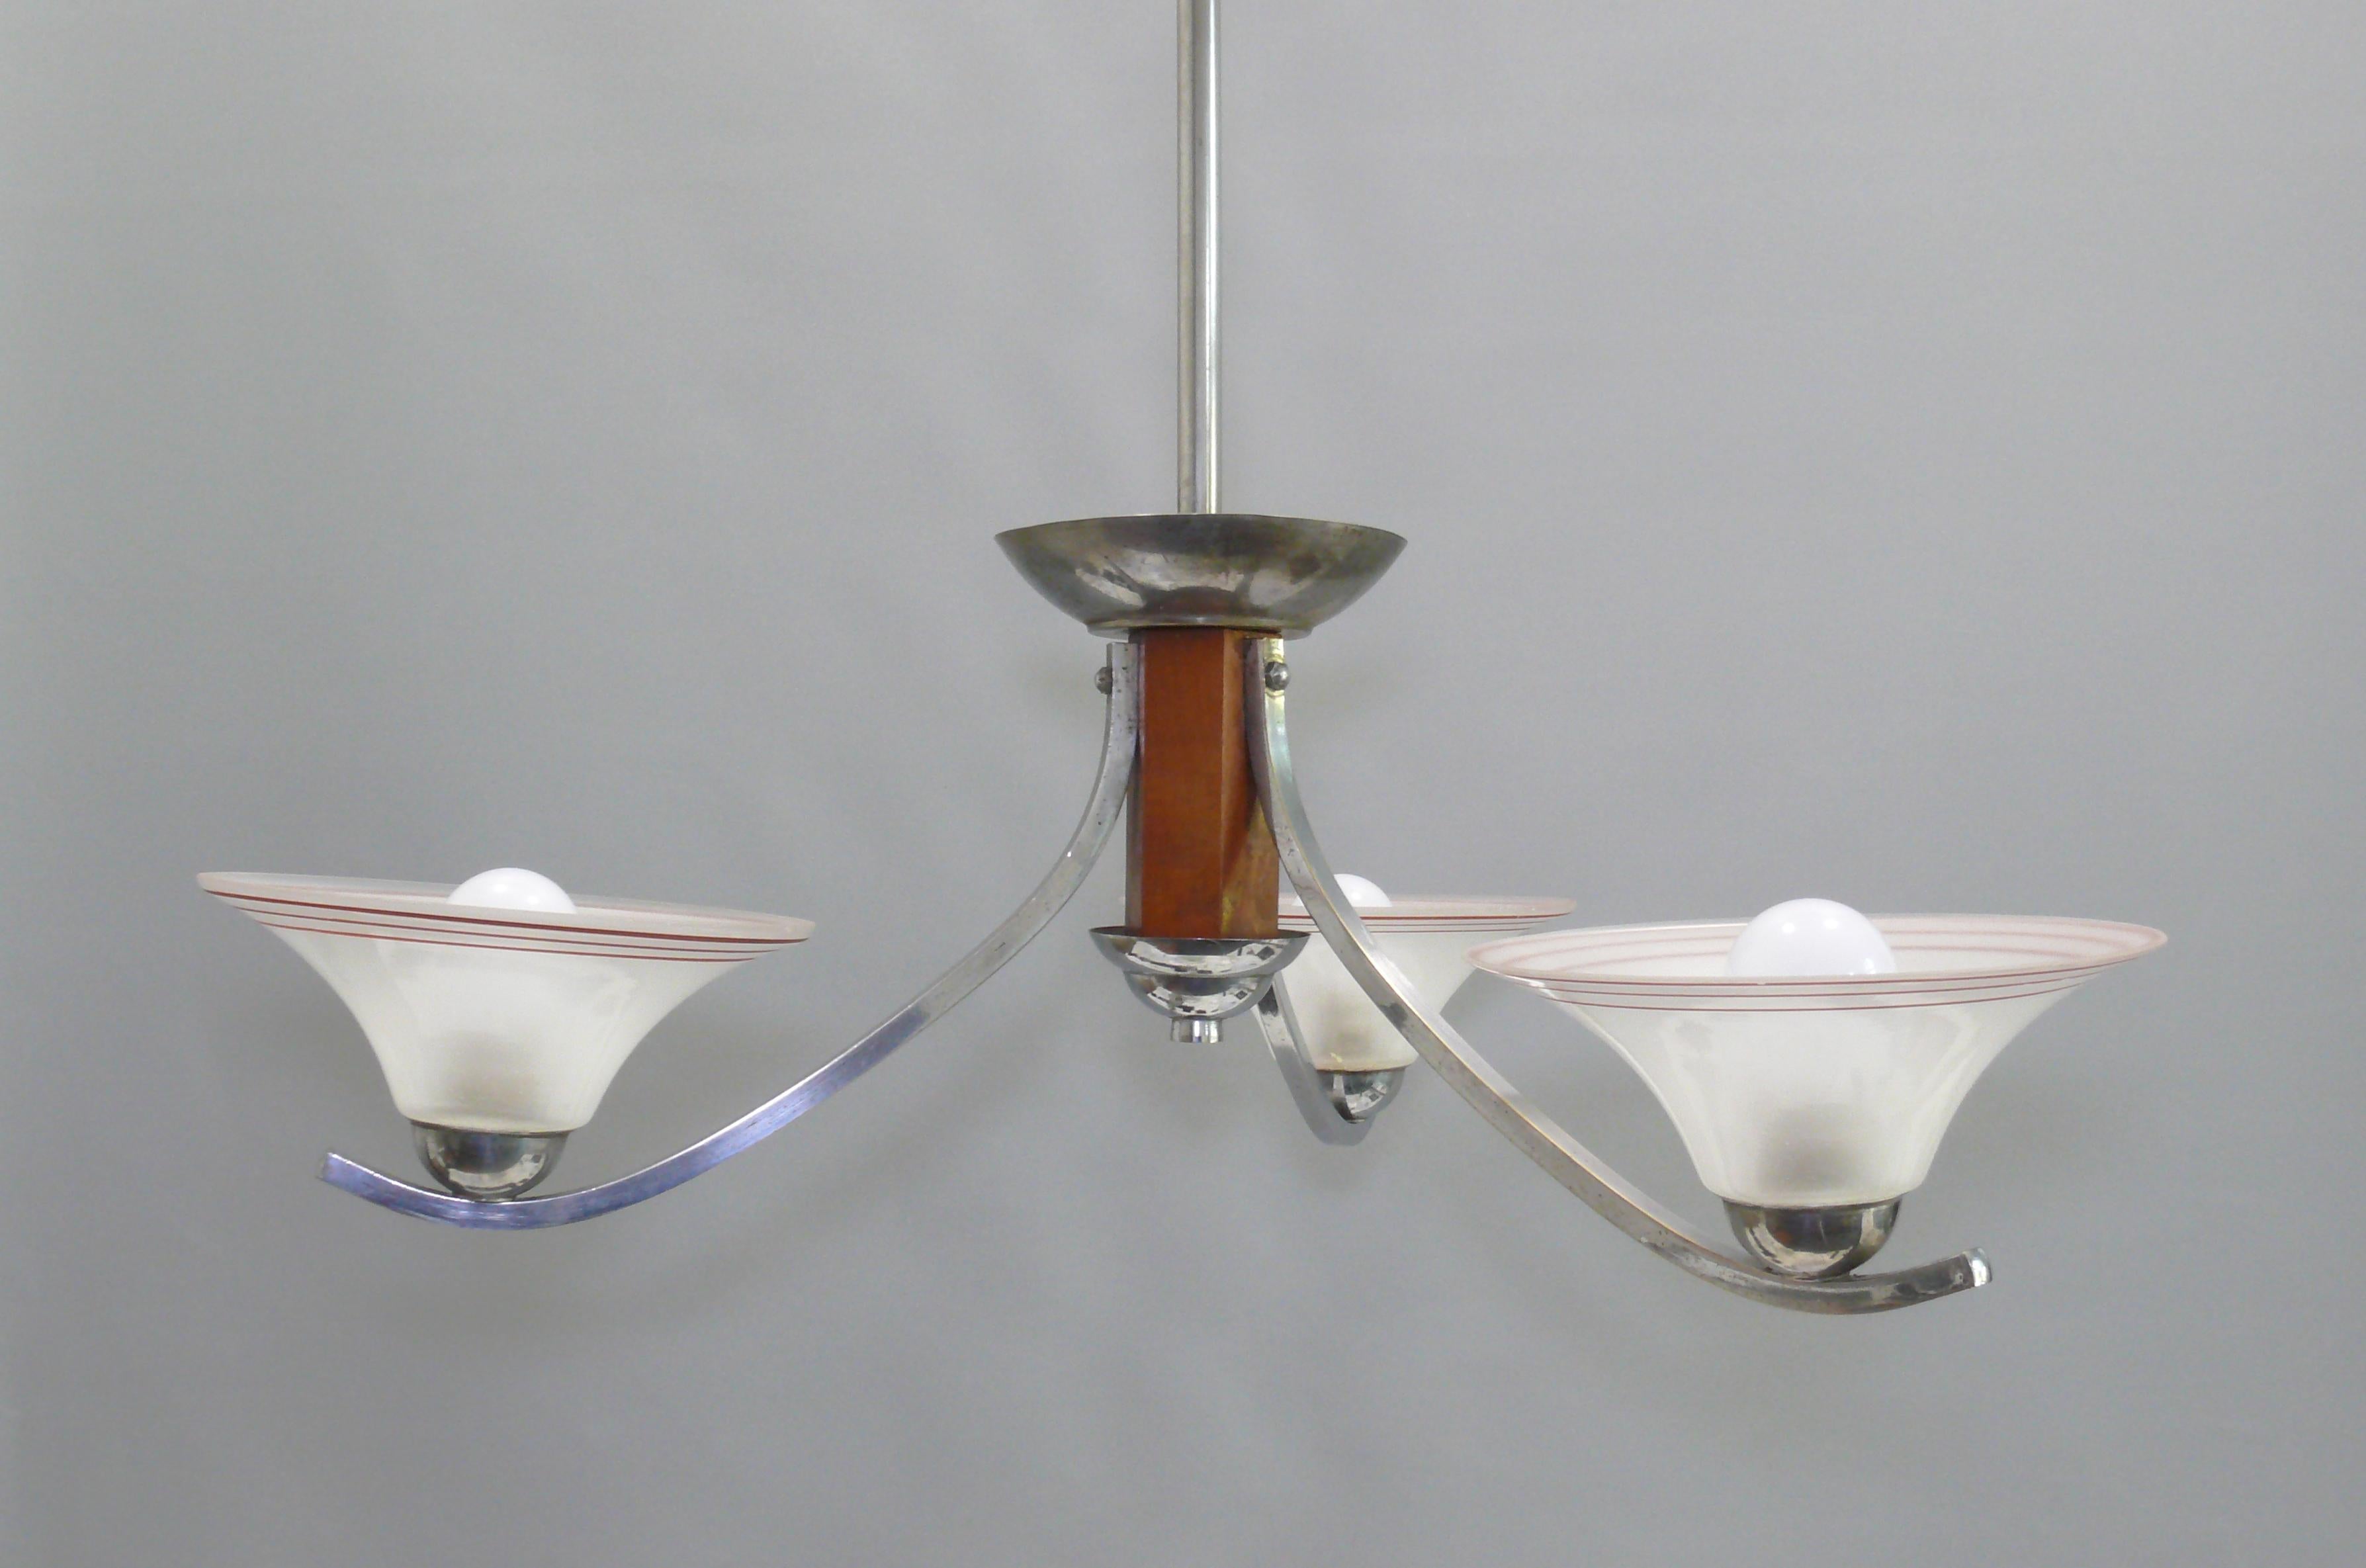 Art Déco Chandelier, France - Chrome, Wood - 1930 In Good Condition For Sale In Schwerin, MV